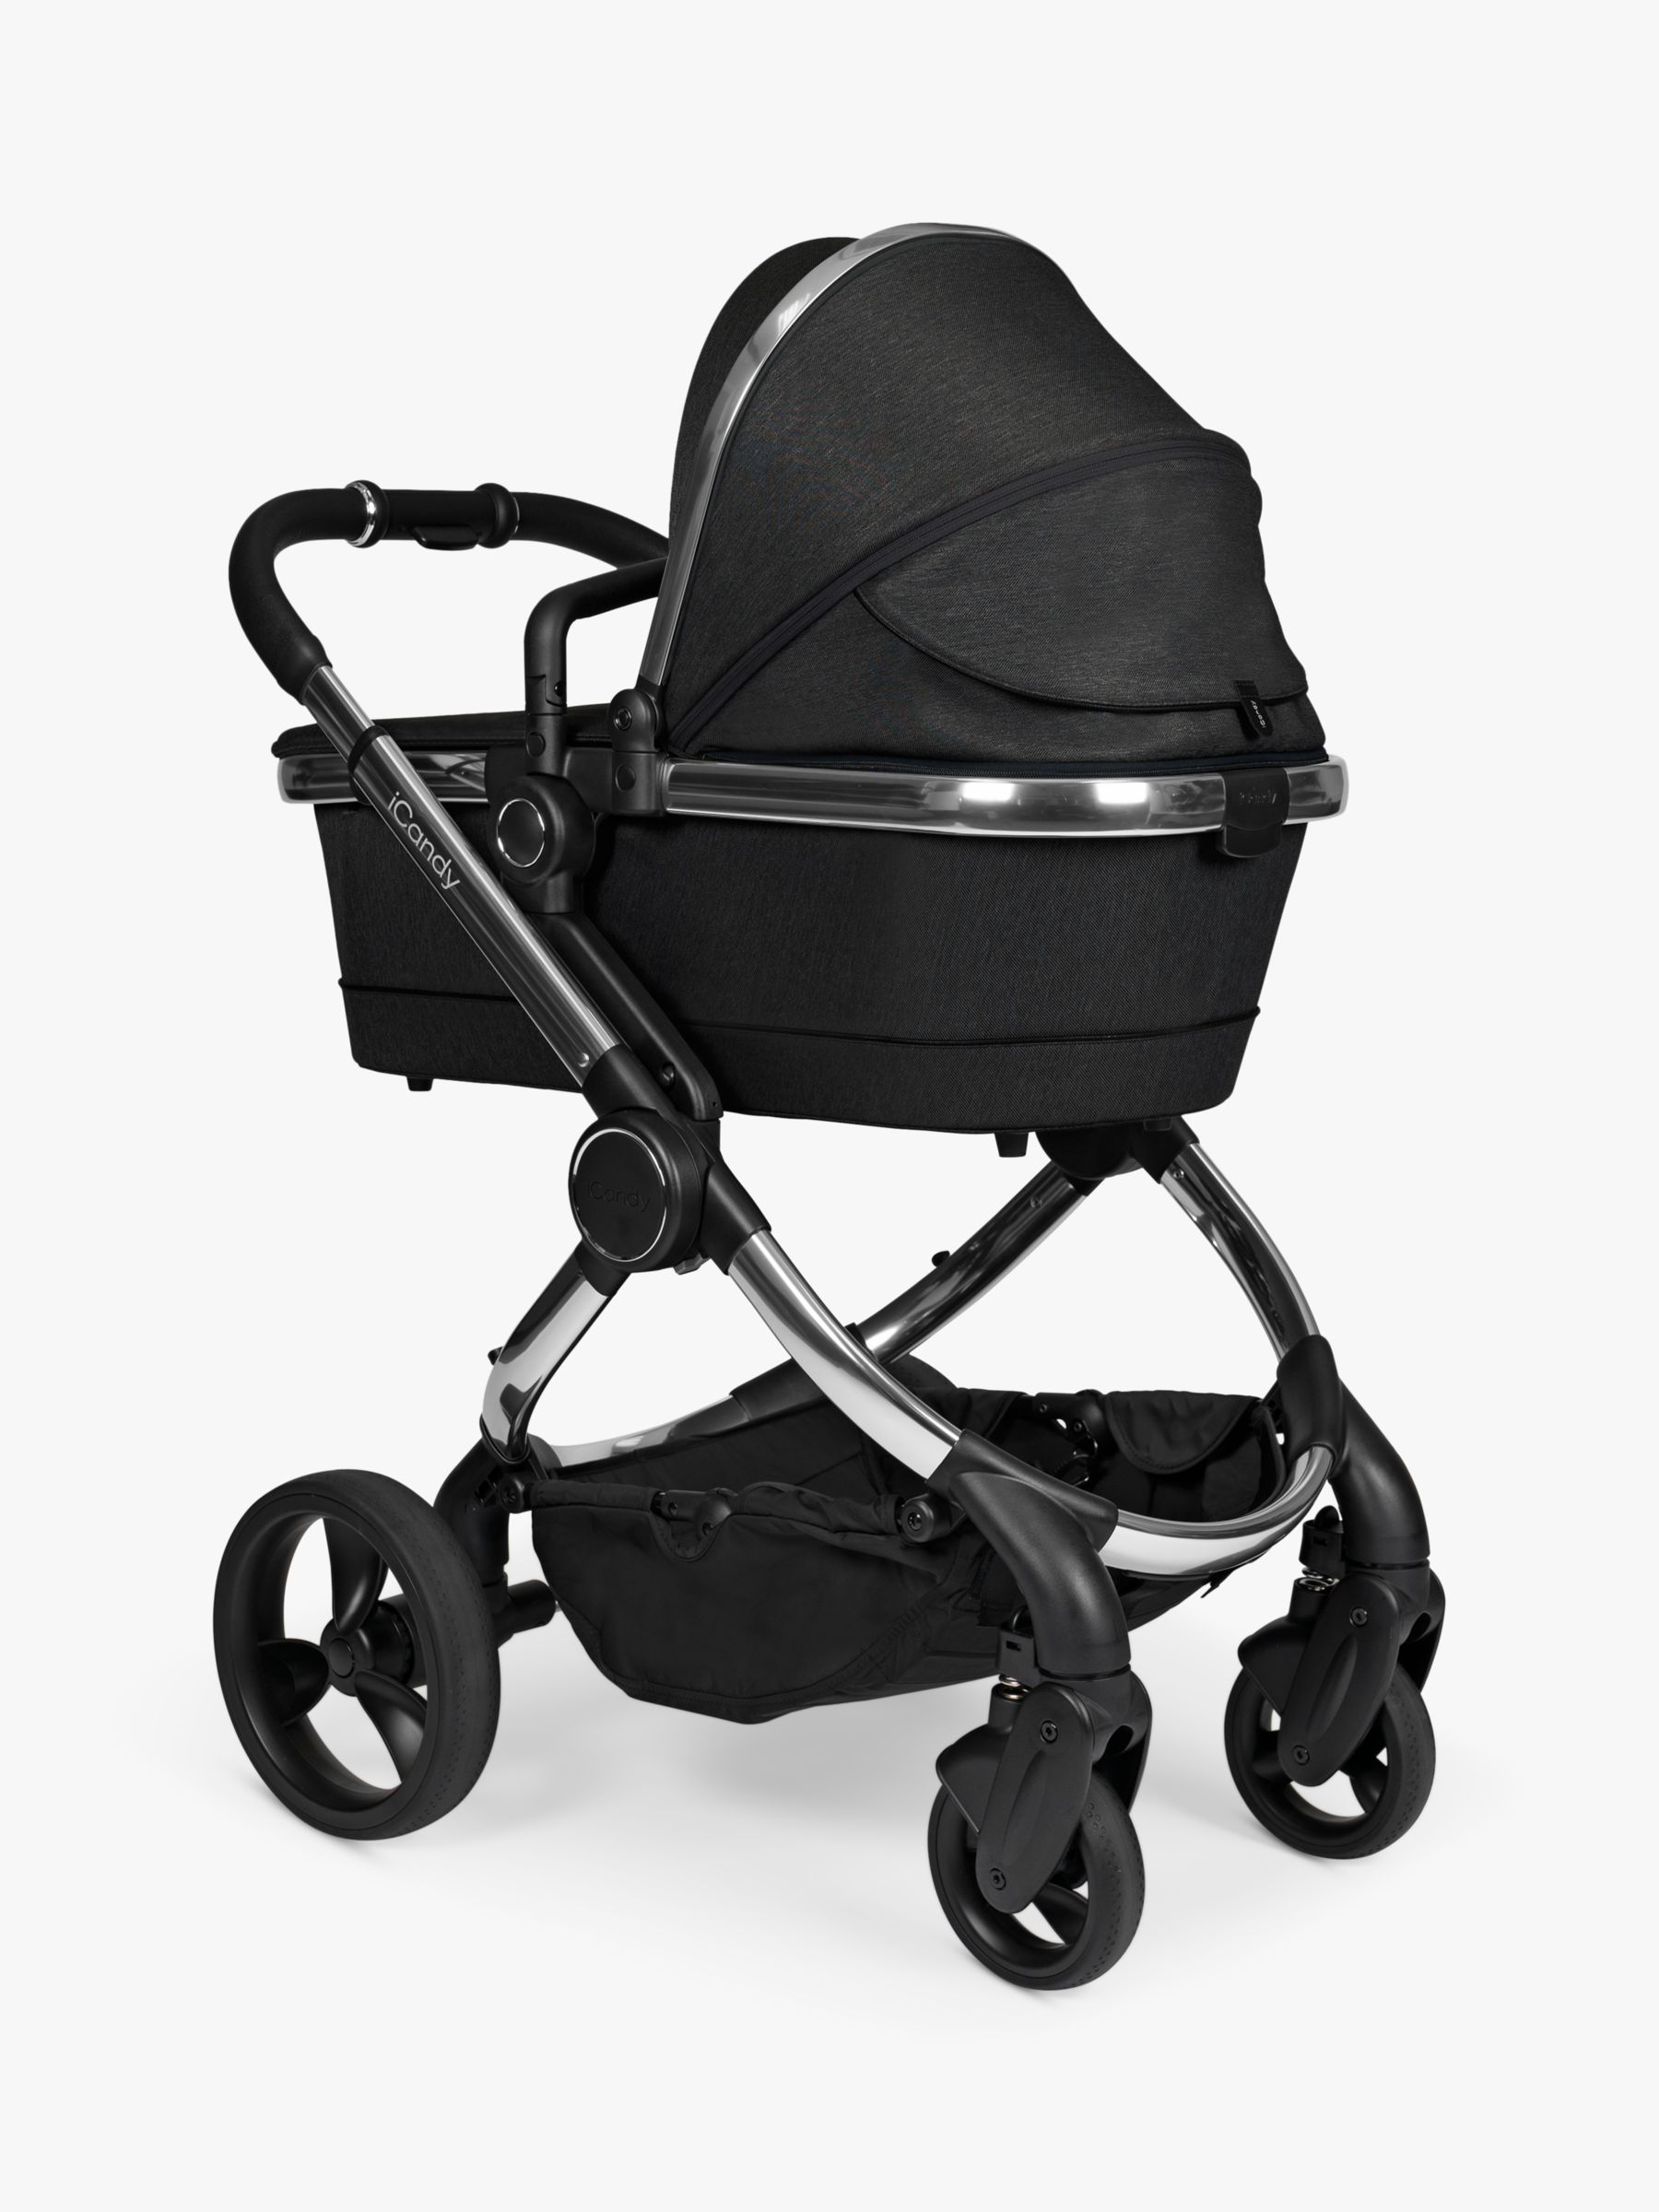 icandy peach carrycot stand